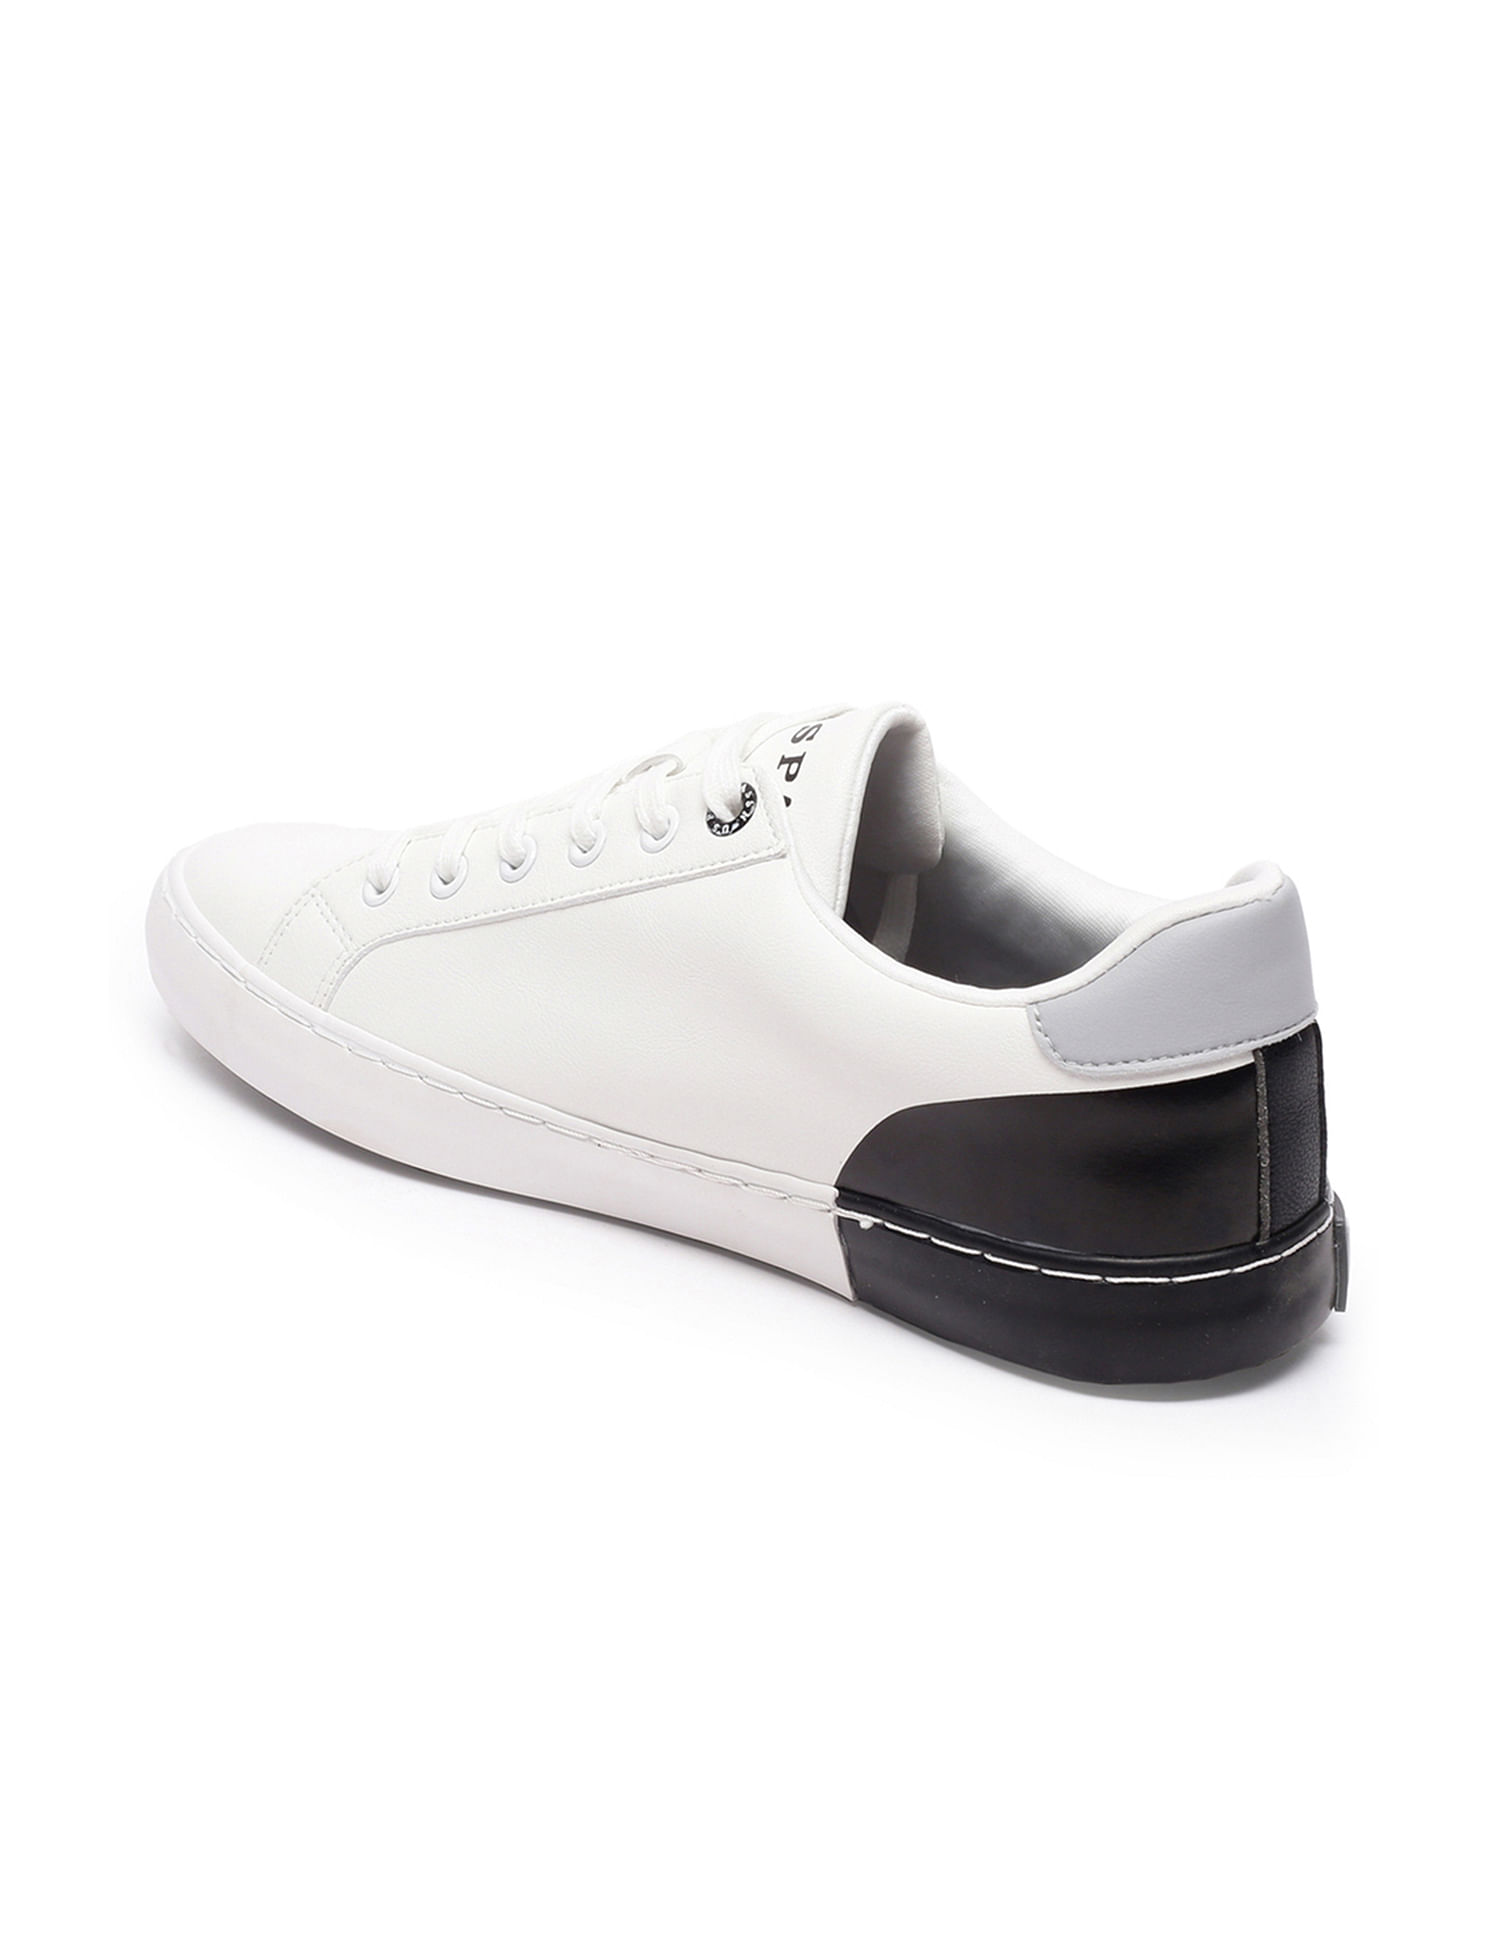 Steve Madden India | Shop High Top Sneakers for Men, Casual Sneakers,  Lounge Sneakers